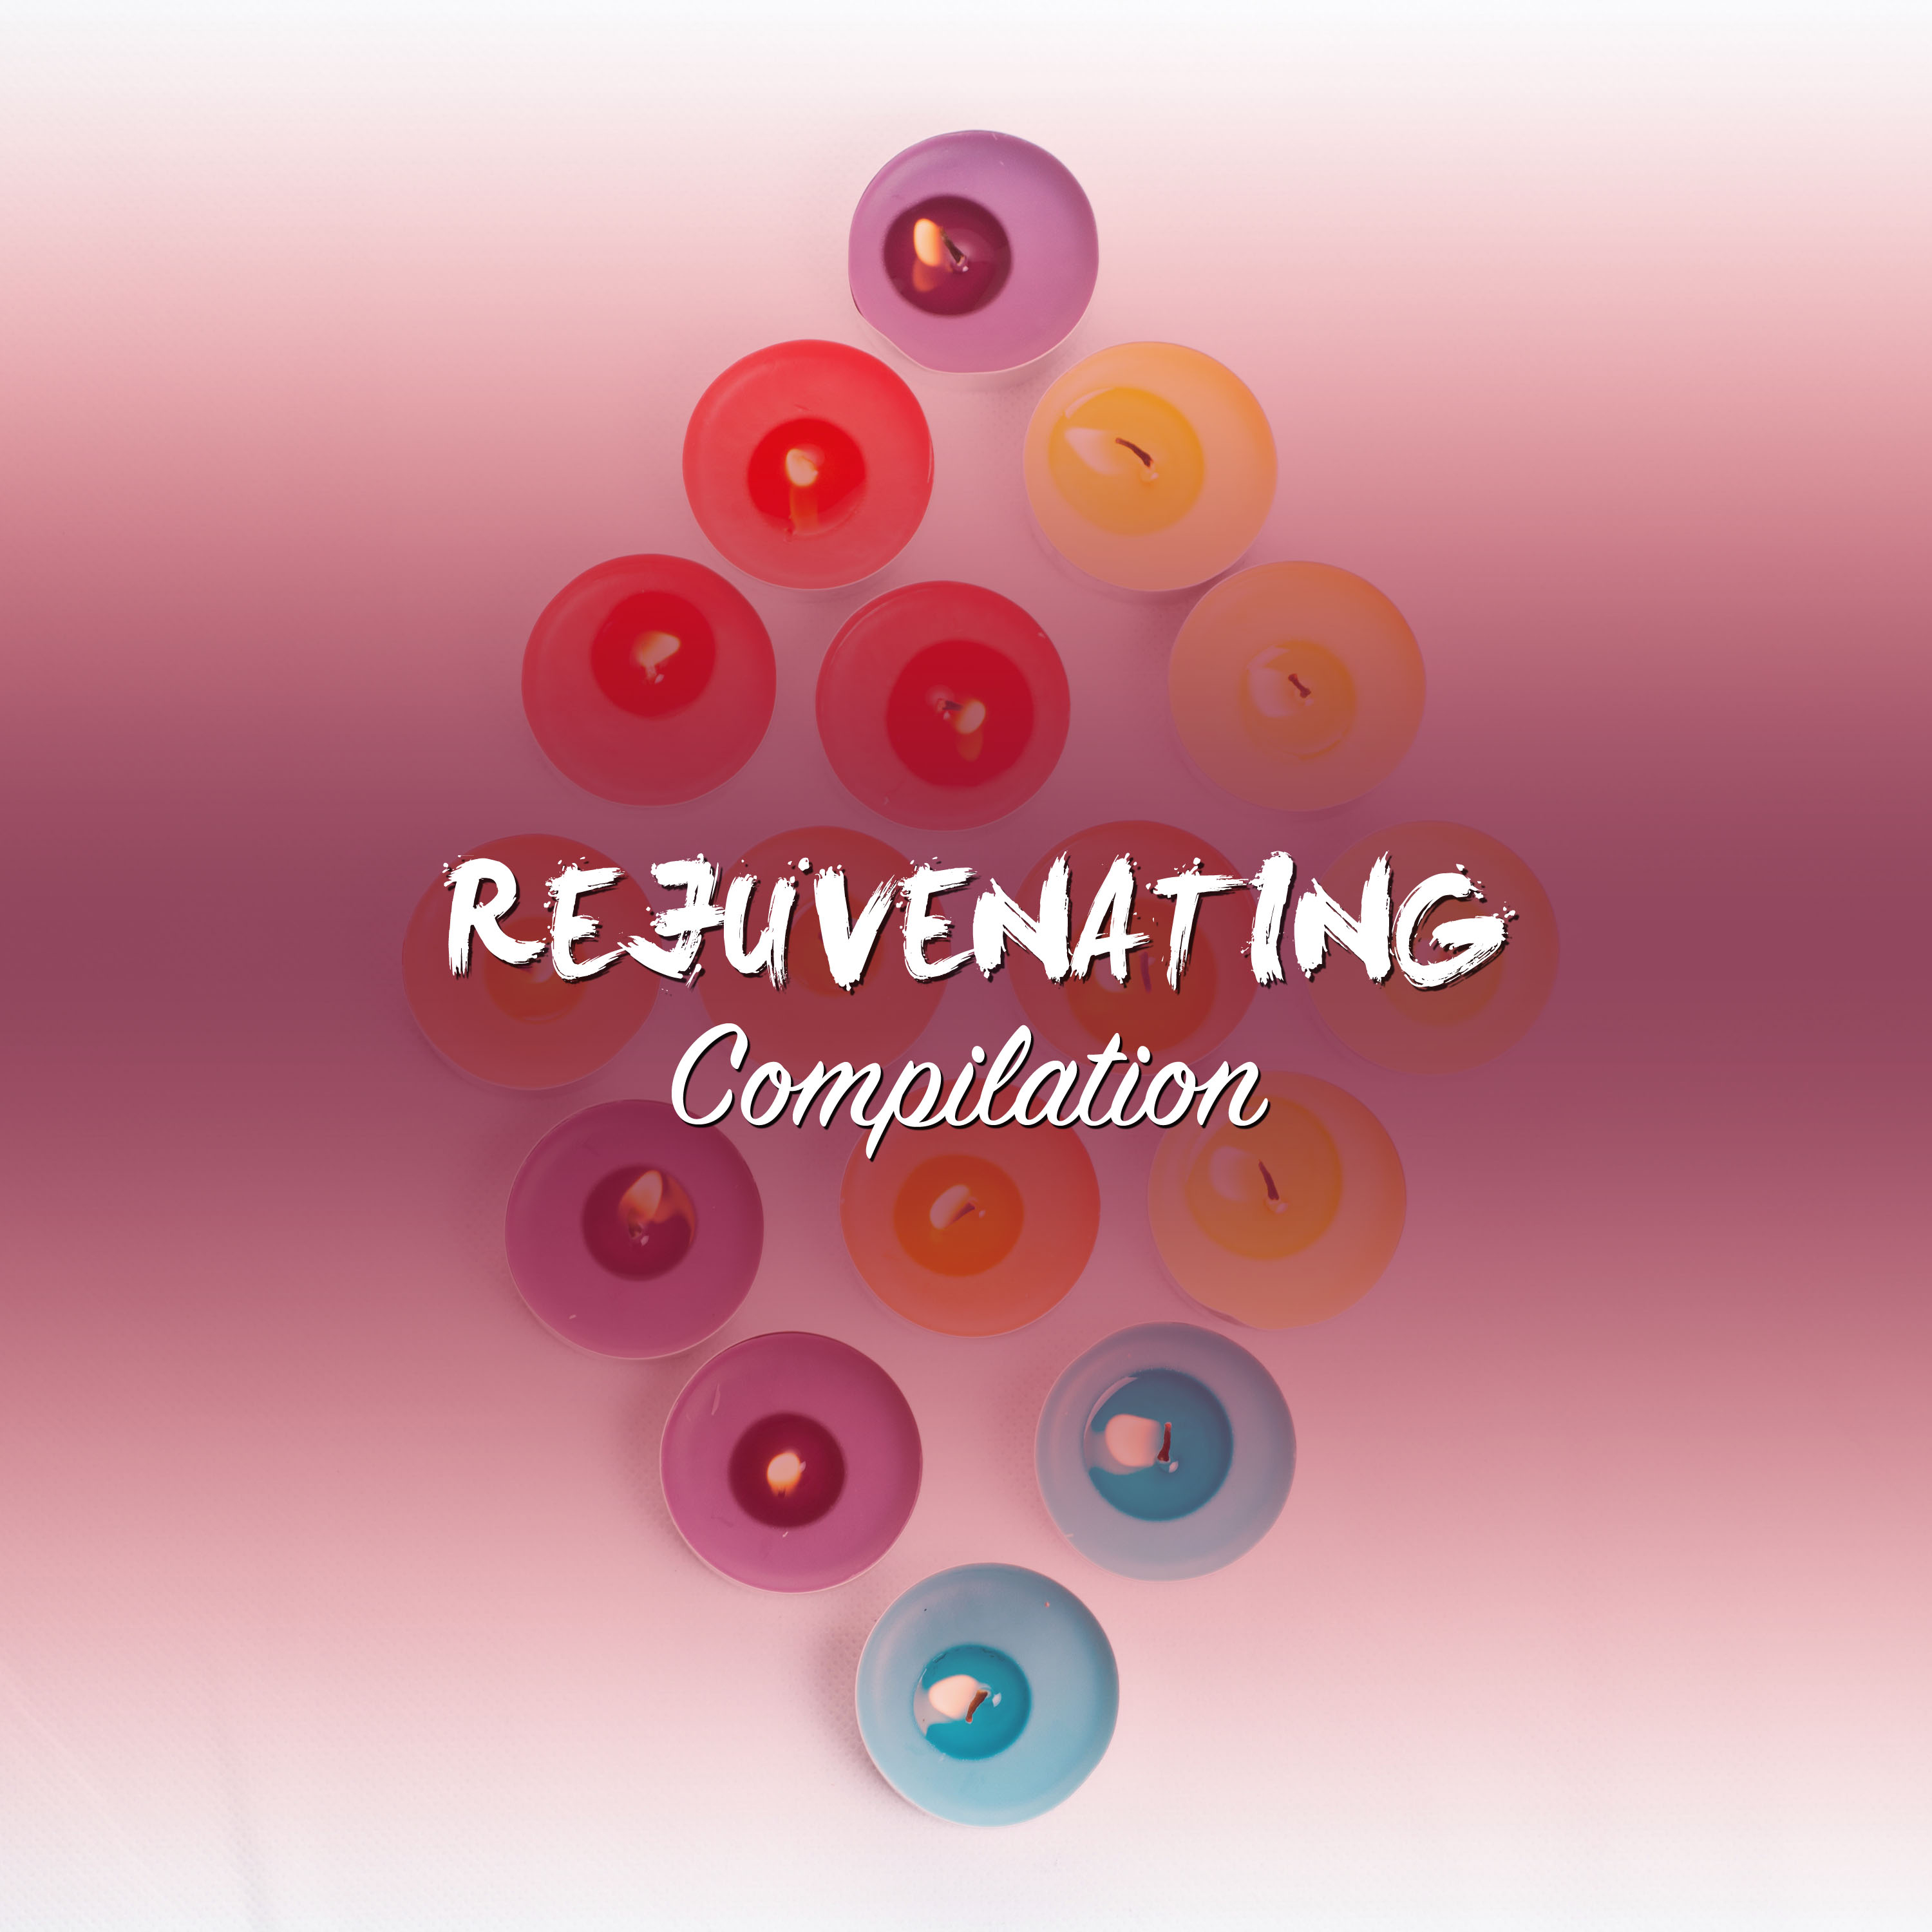 #16 Rejuvenating Compilation for a Great Nights Sleep